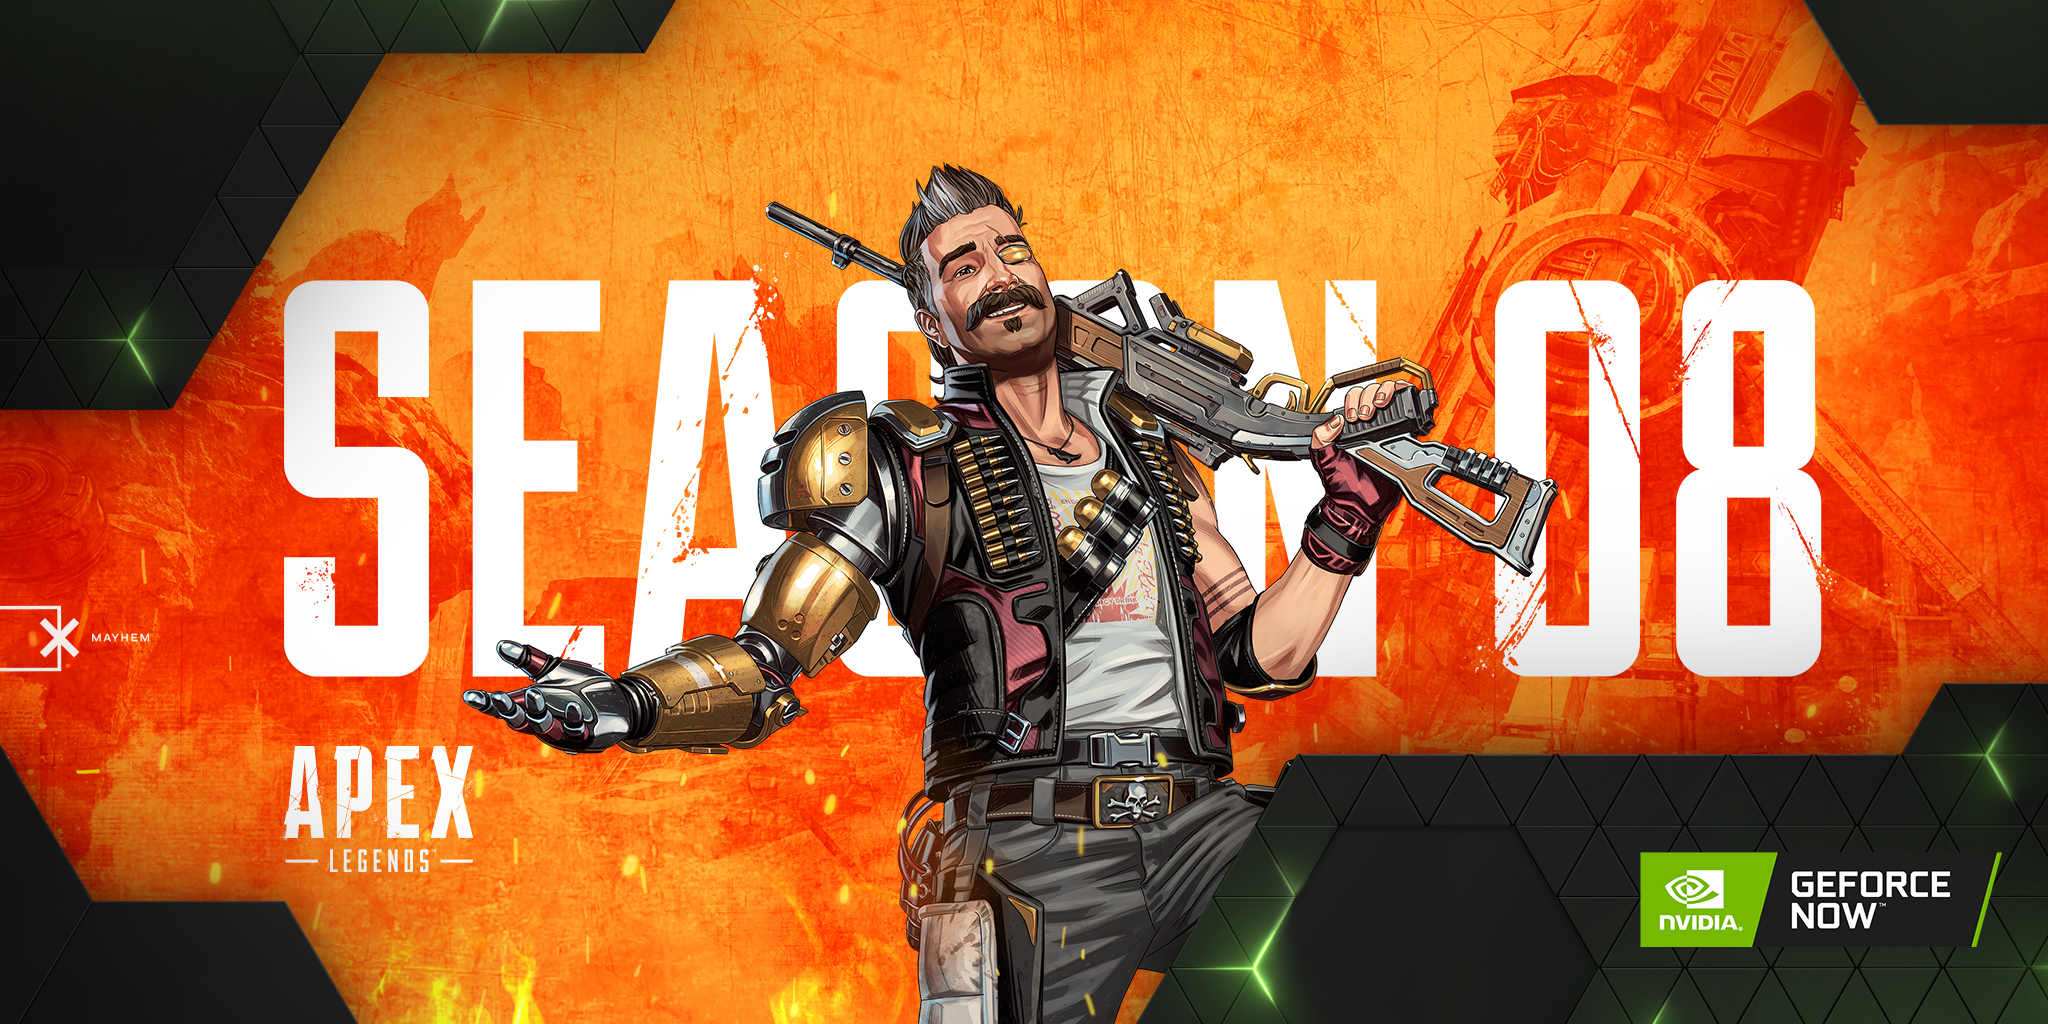 Apex Season 8 Lifeline Apex Legends Season 5 Lifeline With The Crew Youtube Horizon Has Been Added In Season 7 Of Apex Legends And While She Is Truly Fun